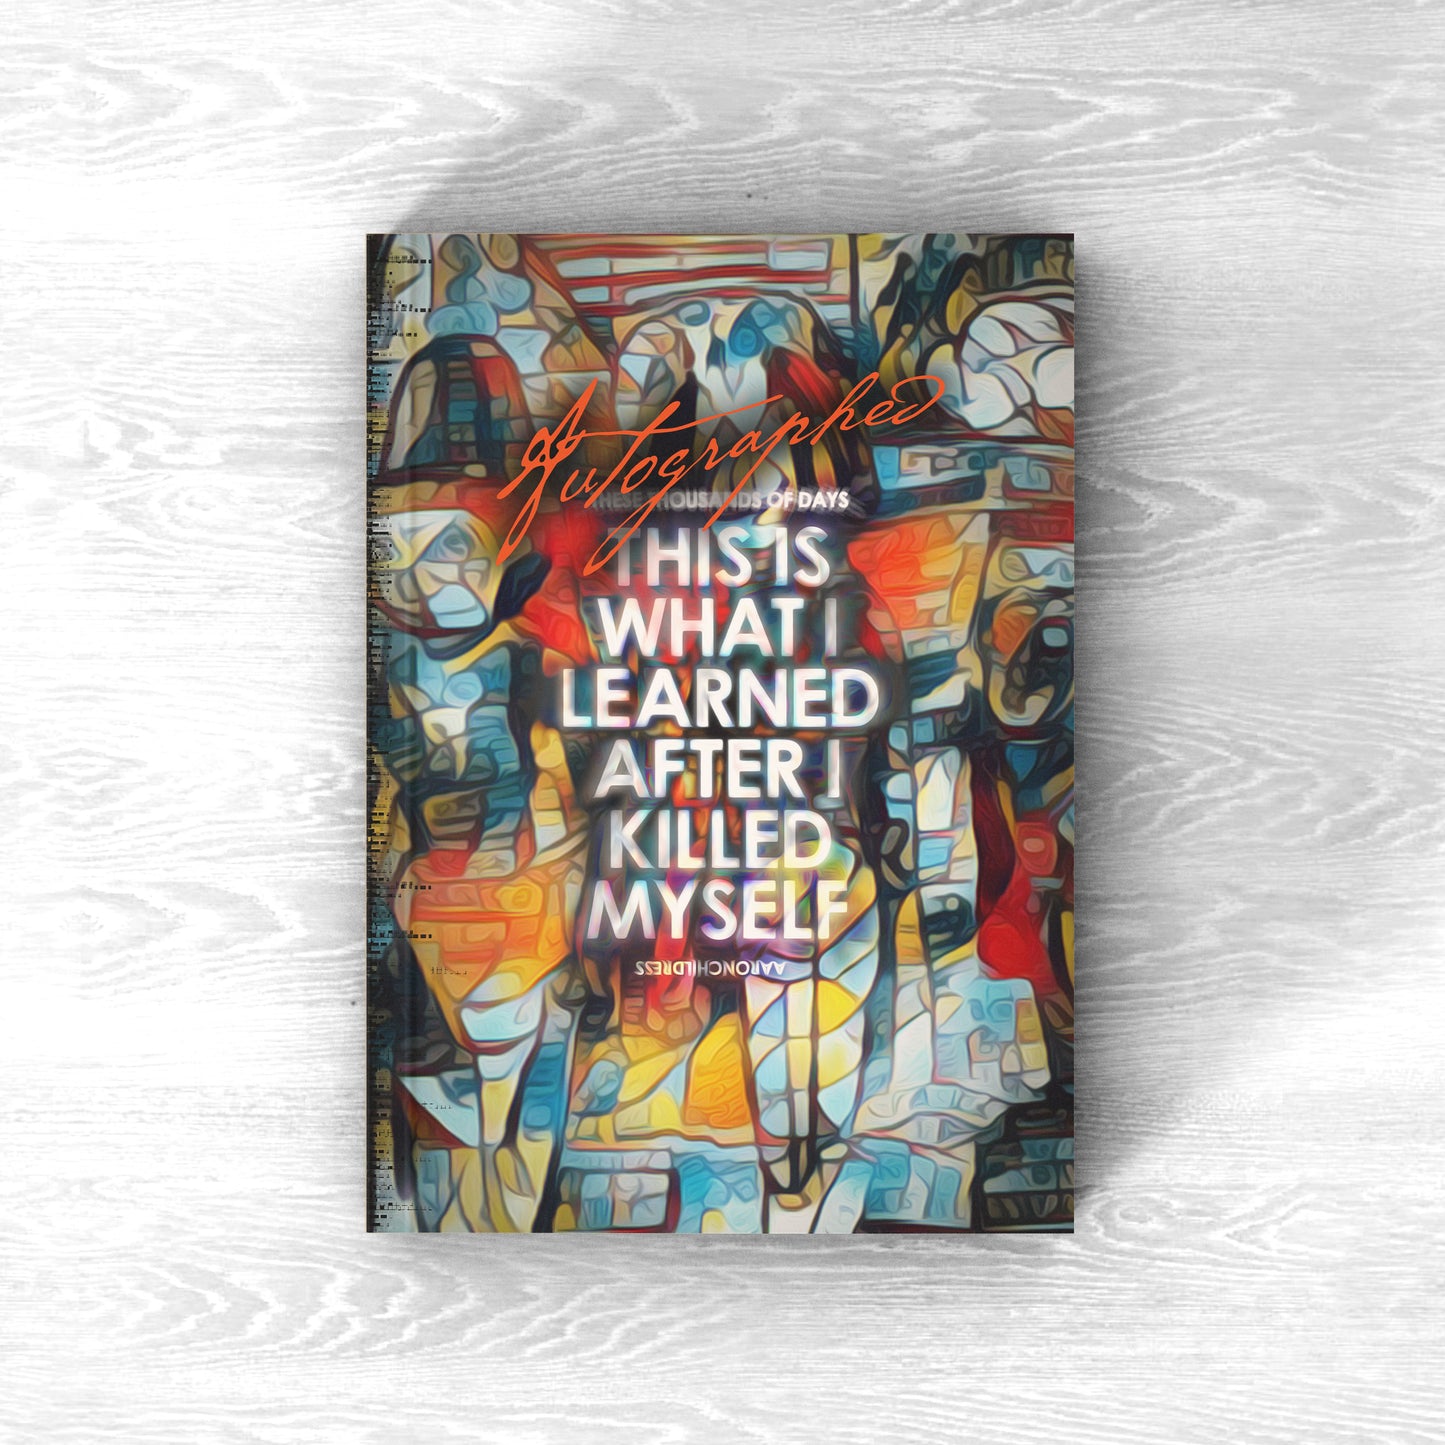 These Thousands of Days: This is What I Learned After I Killed Myself (Autographed) HARDBACK